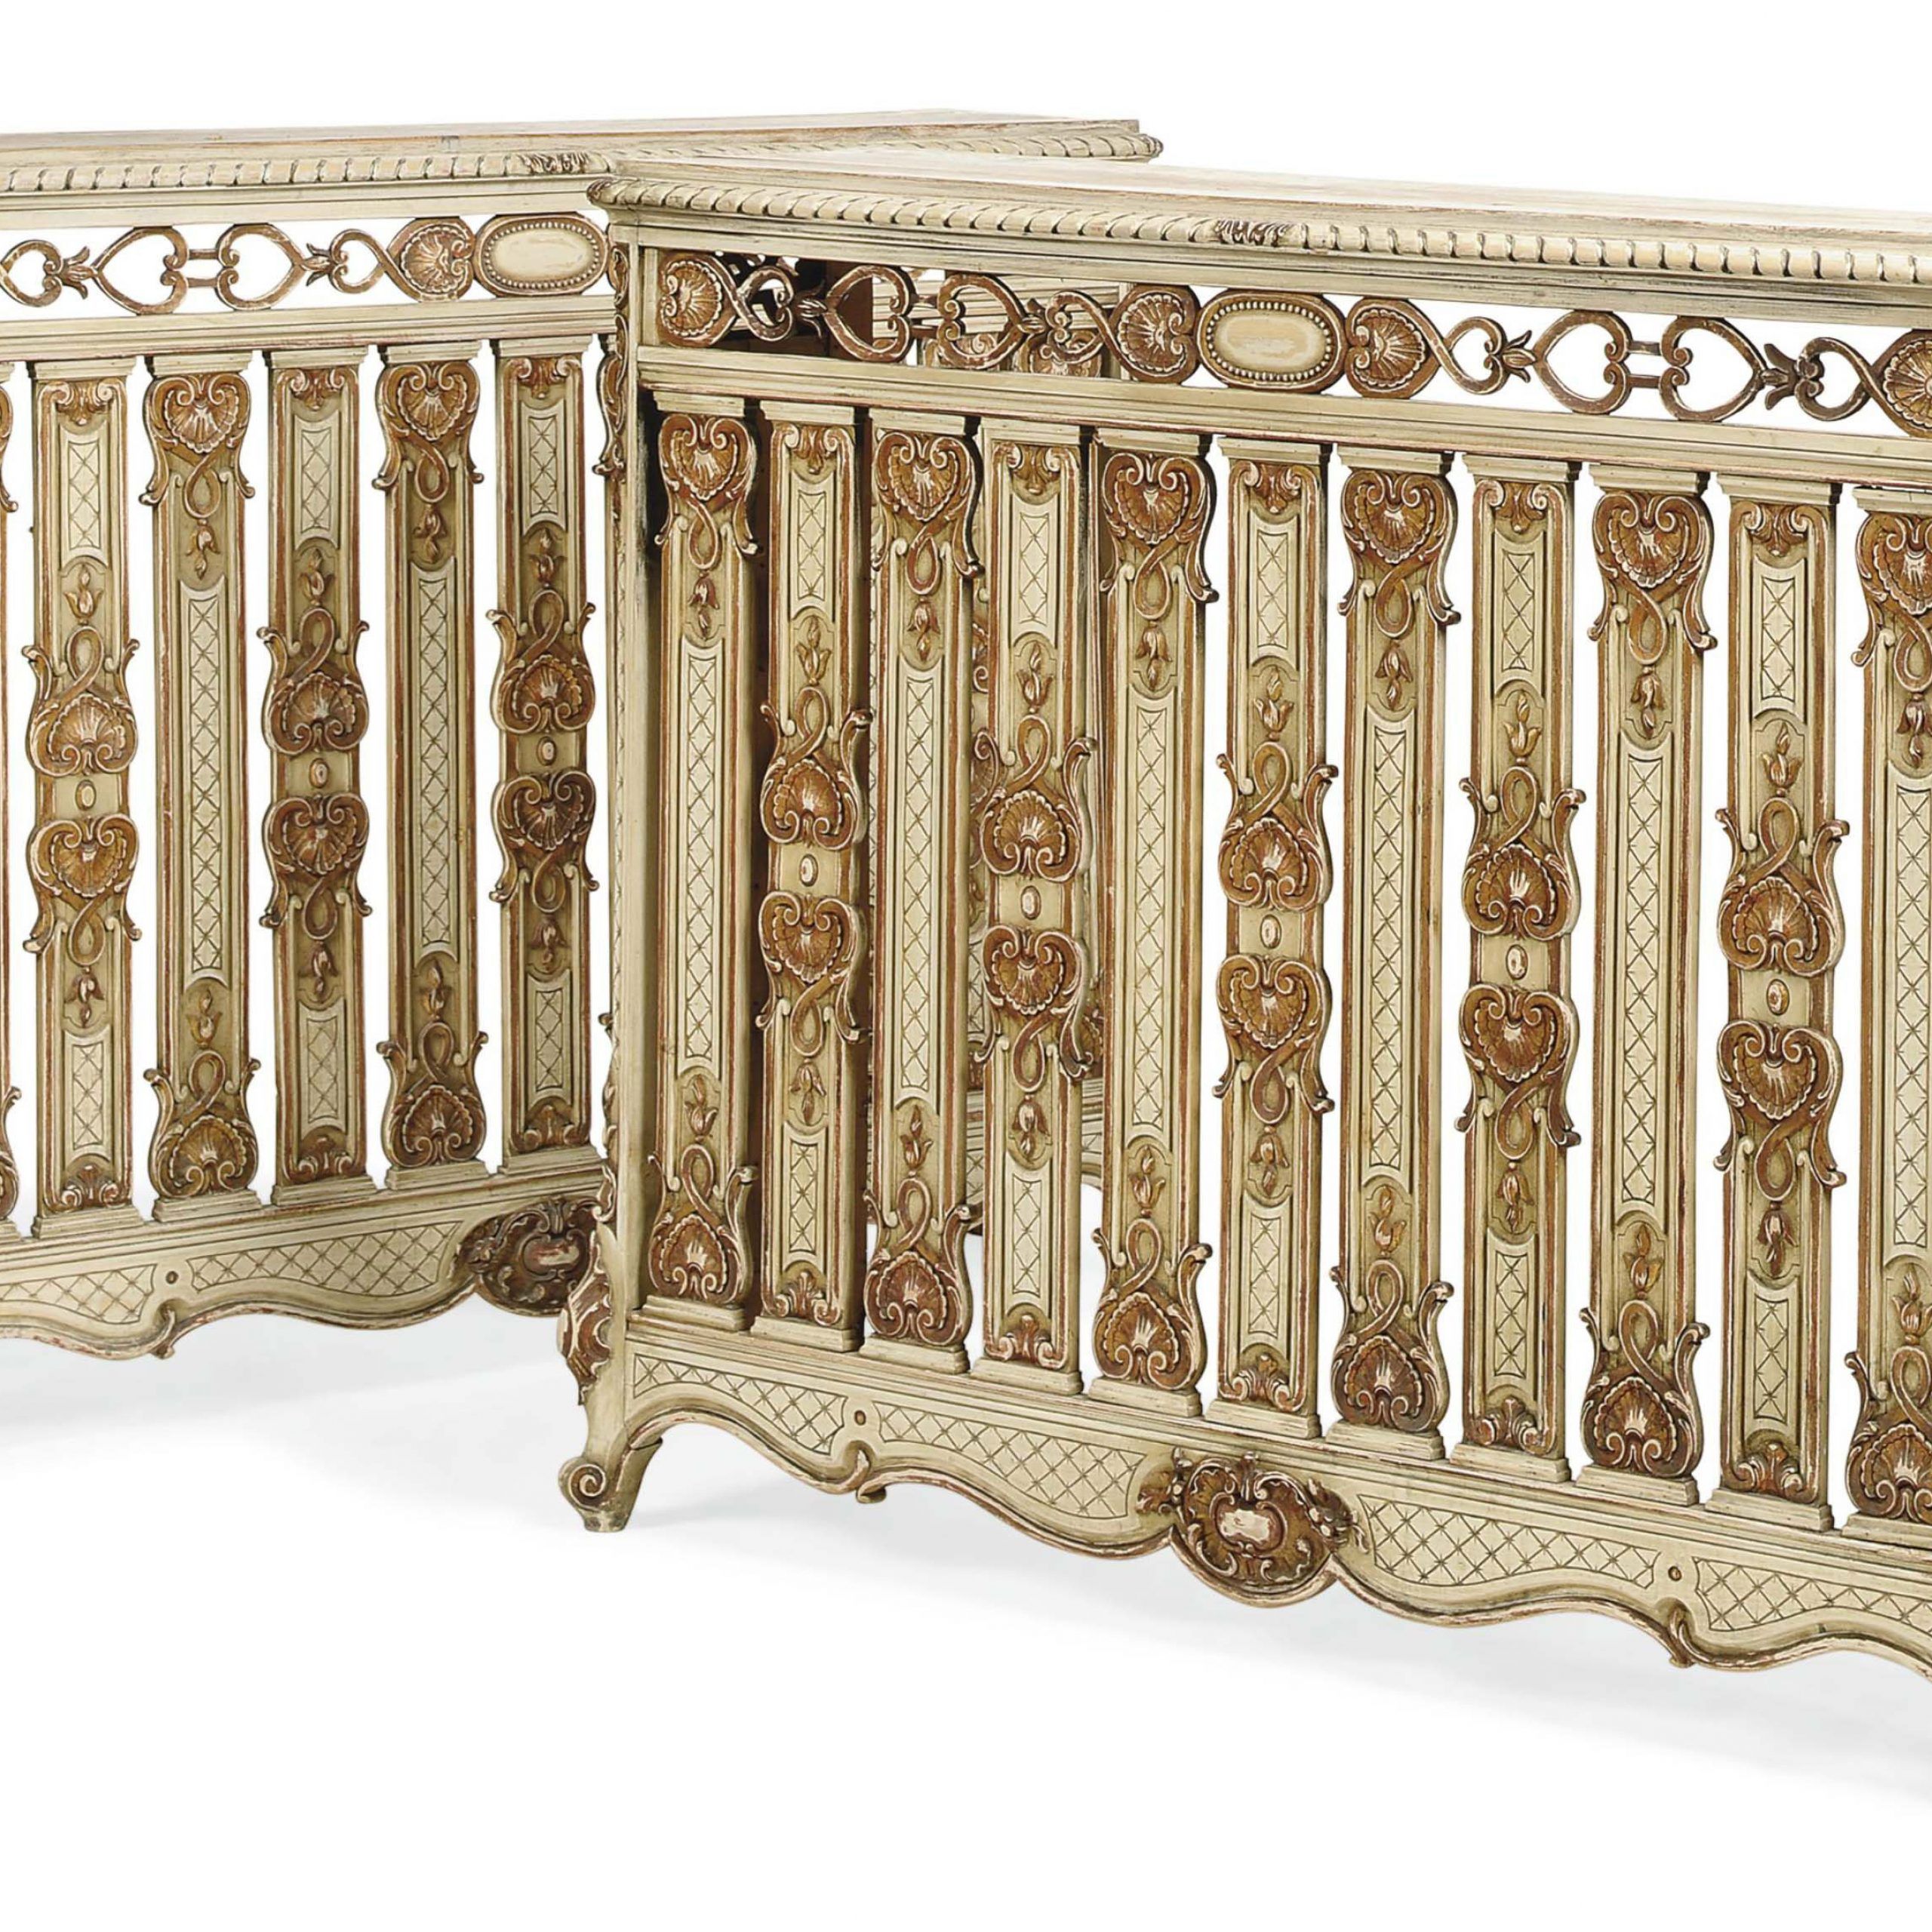 A Pair Of French Cream And Gold Painted Carved Wood Radiator Covers Intended For Cream And Gold Console Tables (View 18 of 20)